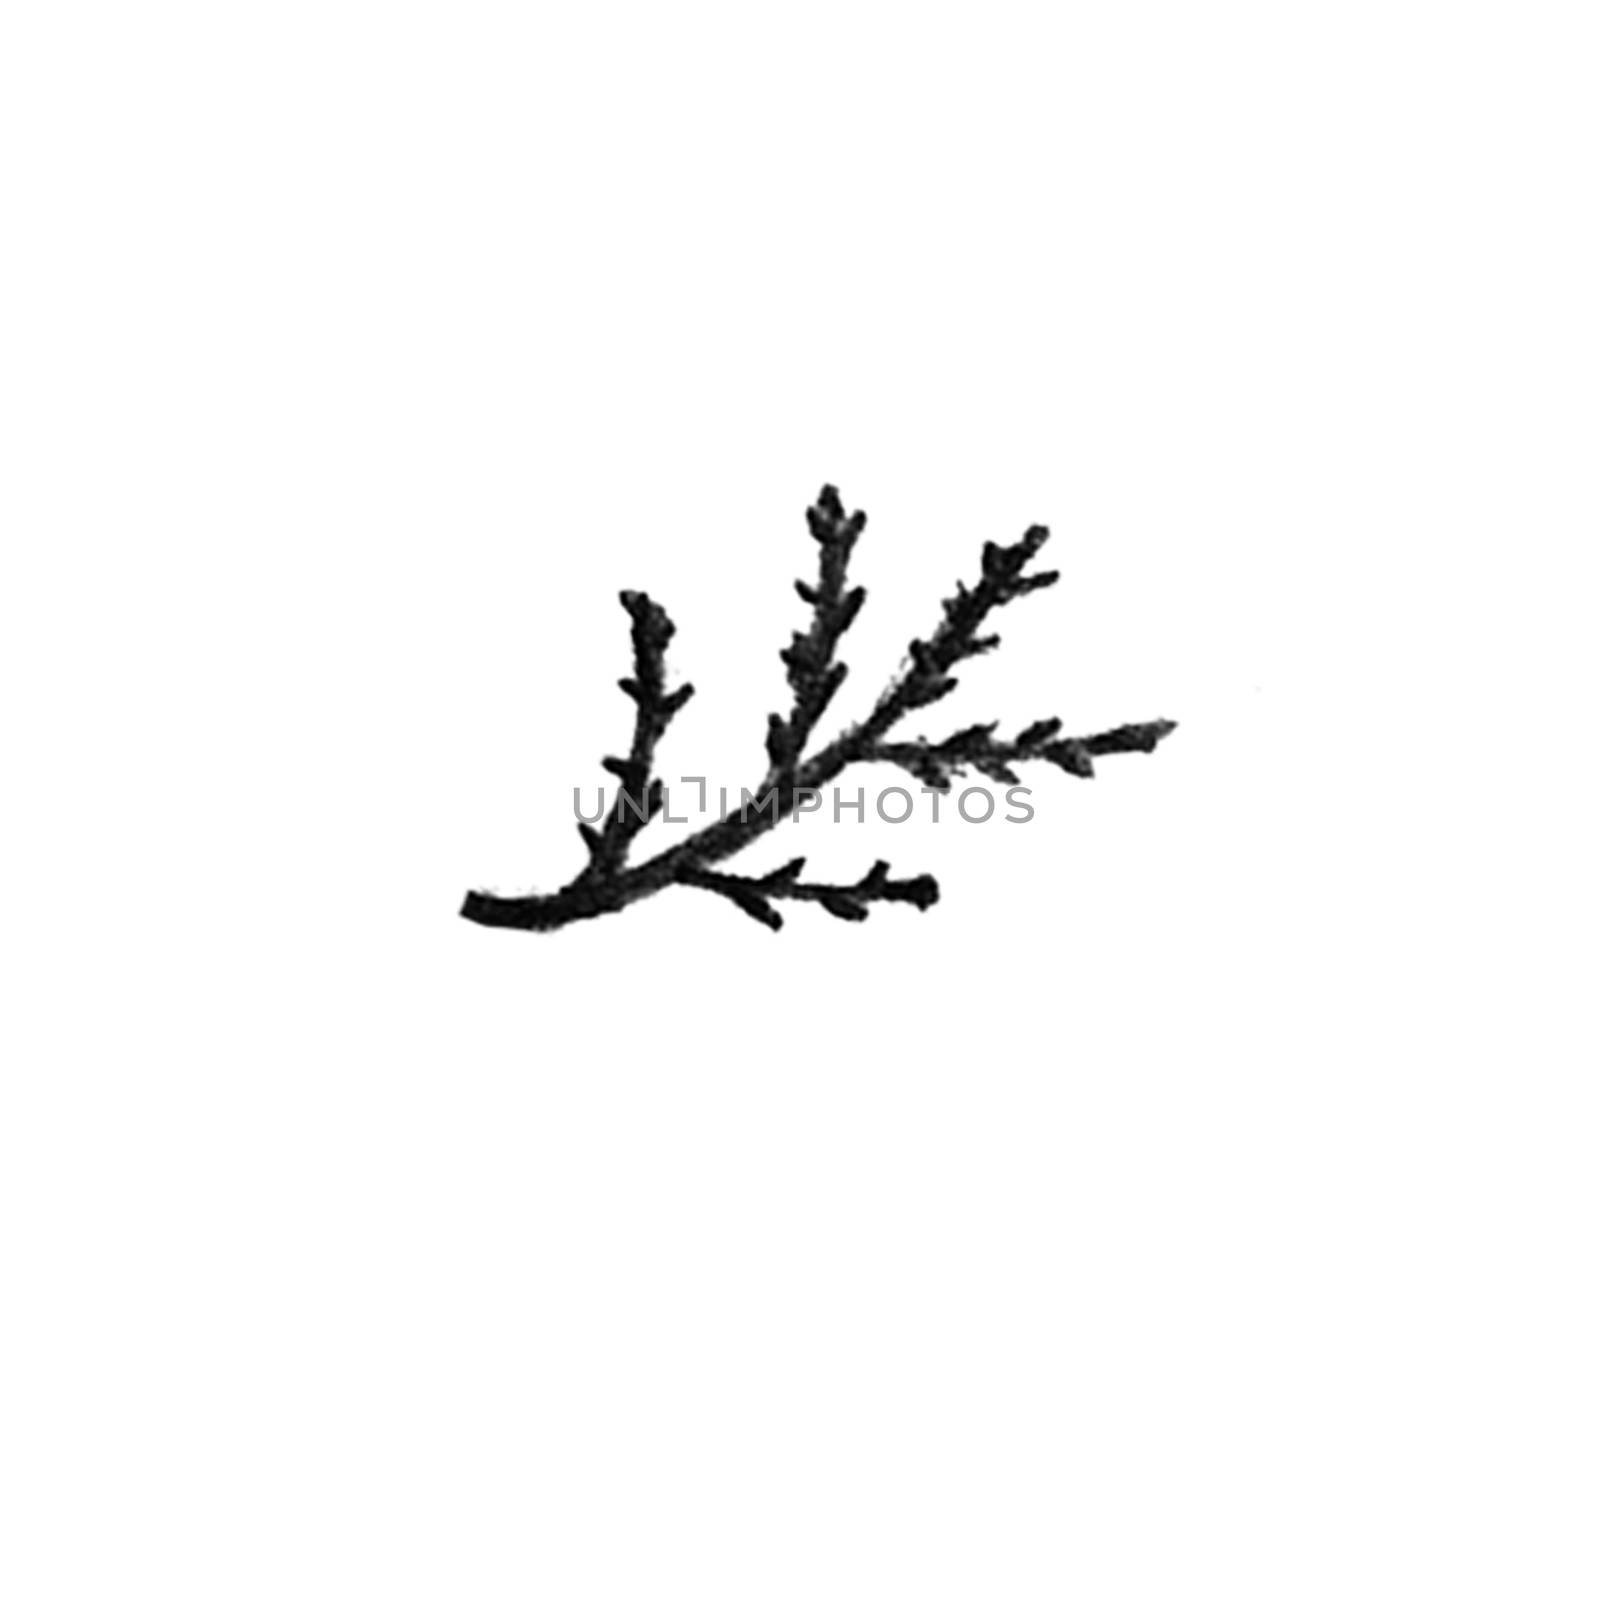 Black and White Hand-Drawn Isolated Flower Twig. Monochrome Botanical Plant Illustration in Sketch Style. Thin-leaved Marigolds for Print, Tattoo, Design, Holiday, Wedding and Birthday Card.